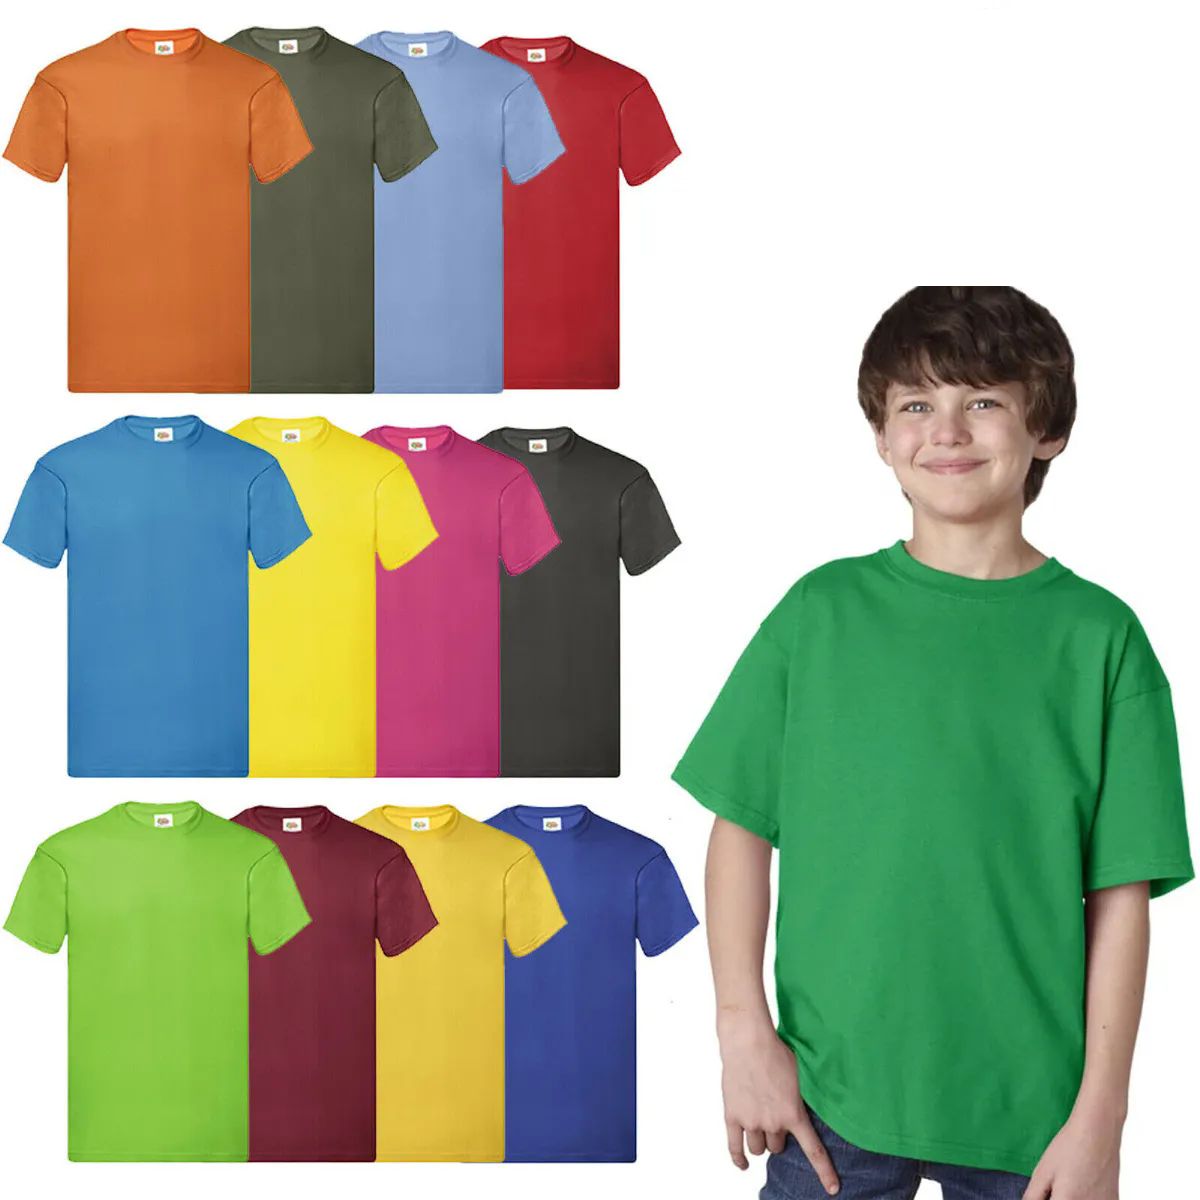 24 Pieces of Billionhats Kids Youth Cotton Assorted Colors T-Shirts Size Large